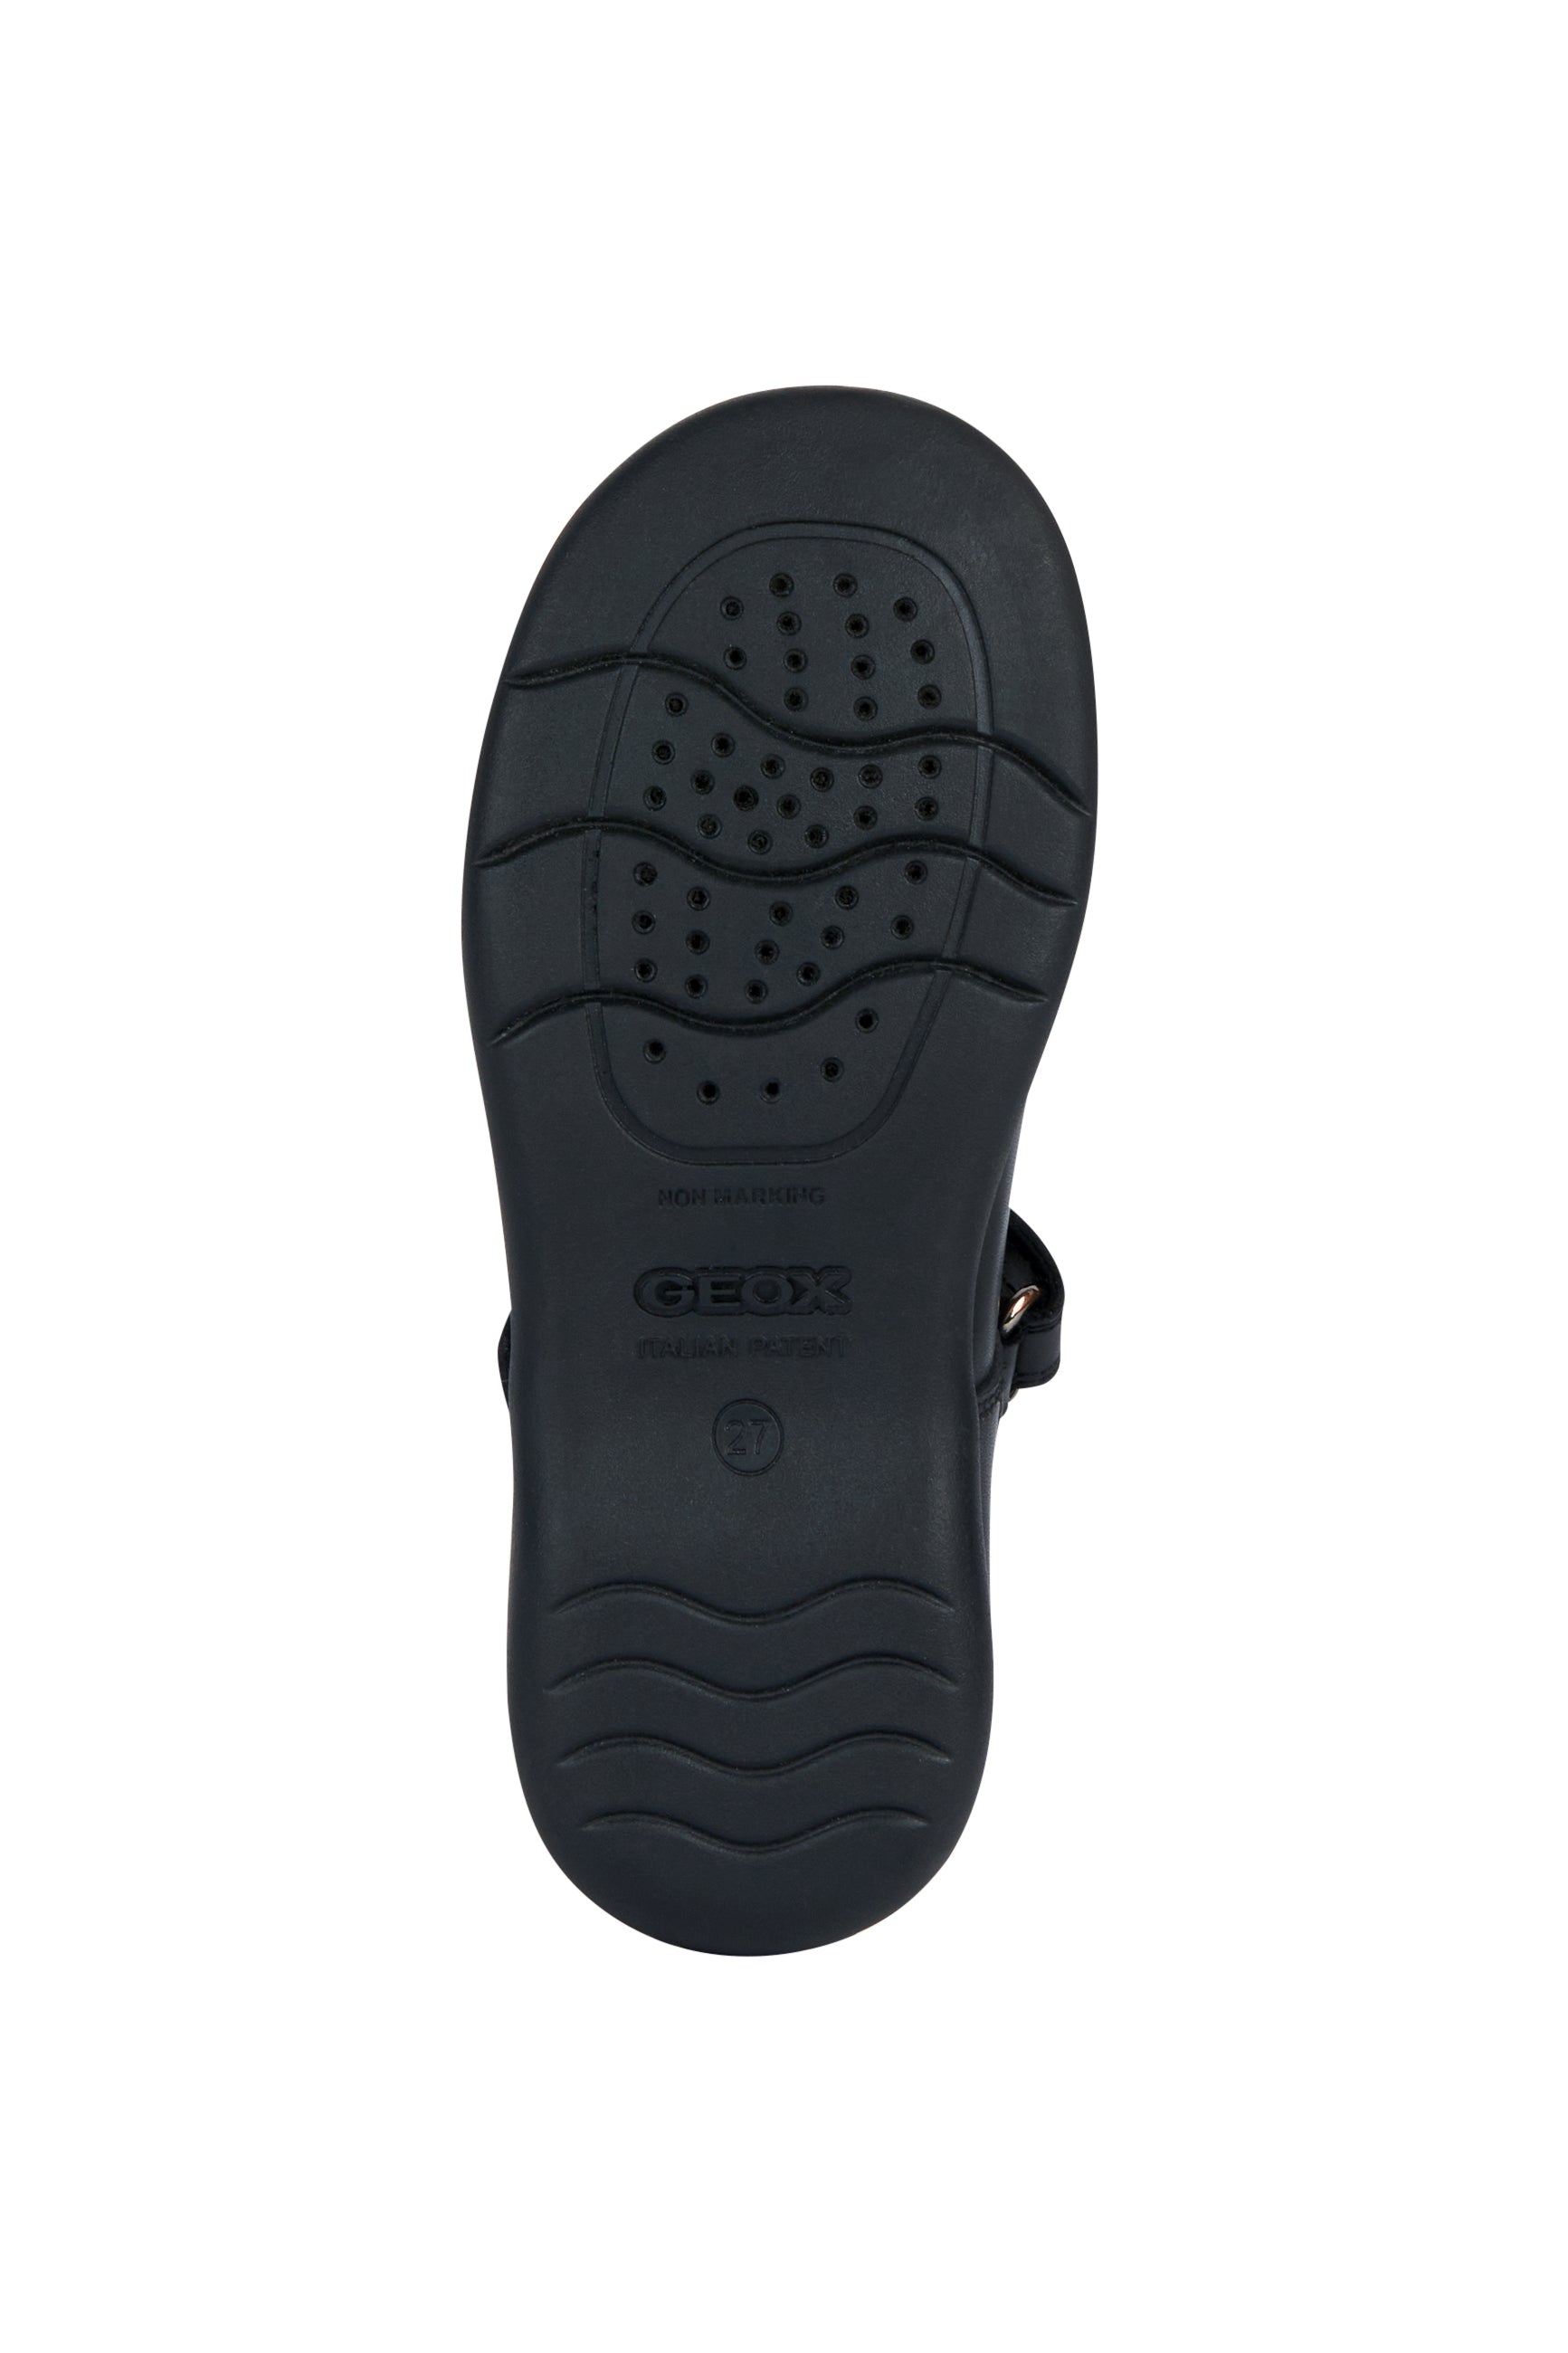 A girls school shoe by Geox, style Naimara in black with a velcro strap. View of sole.